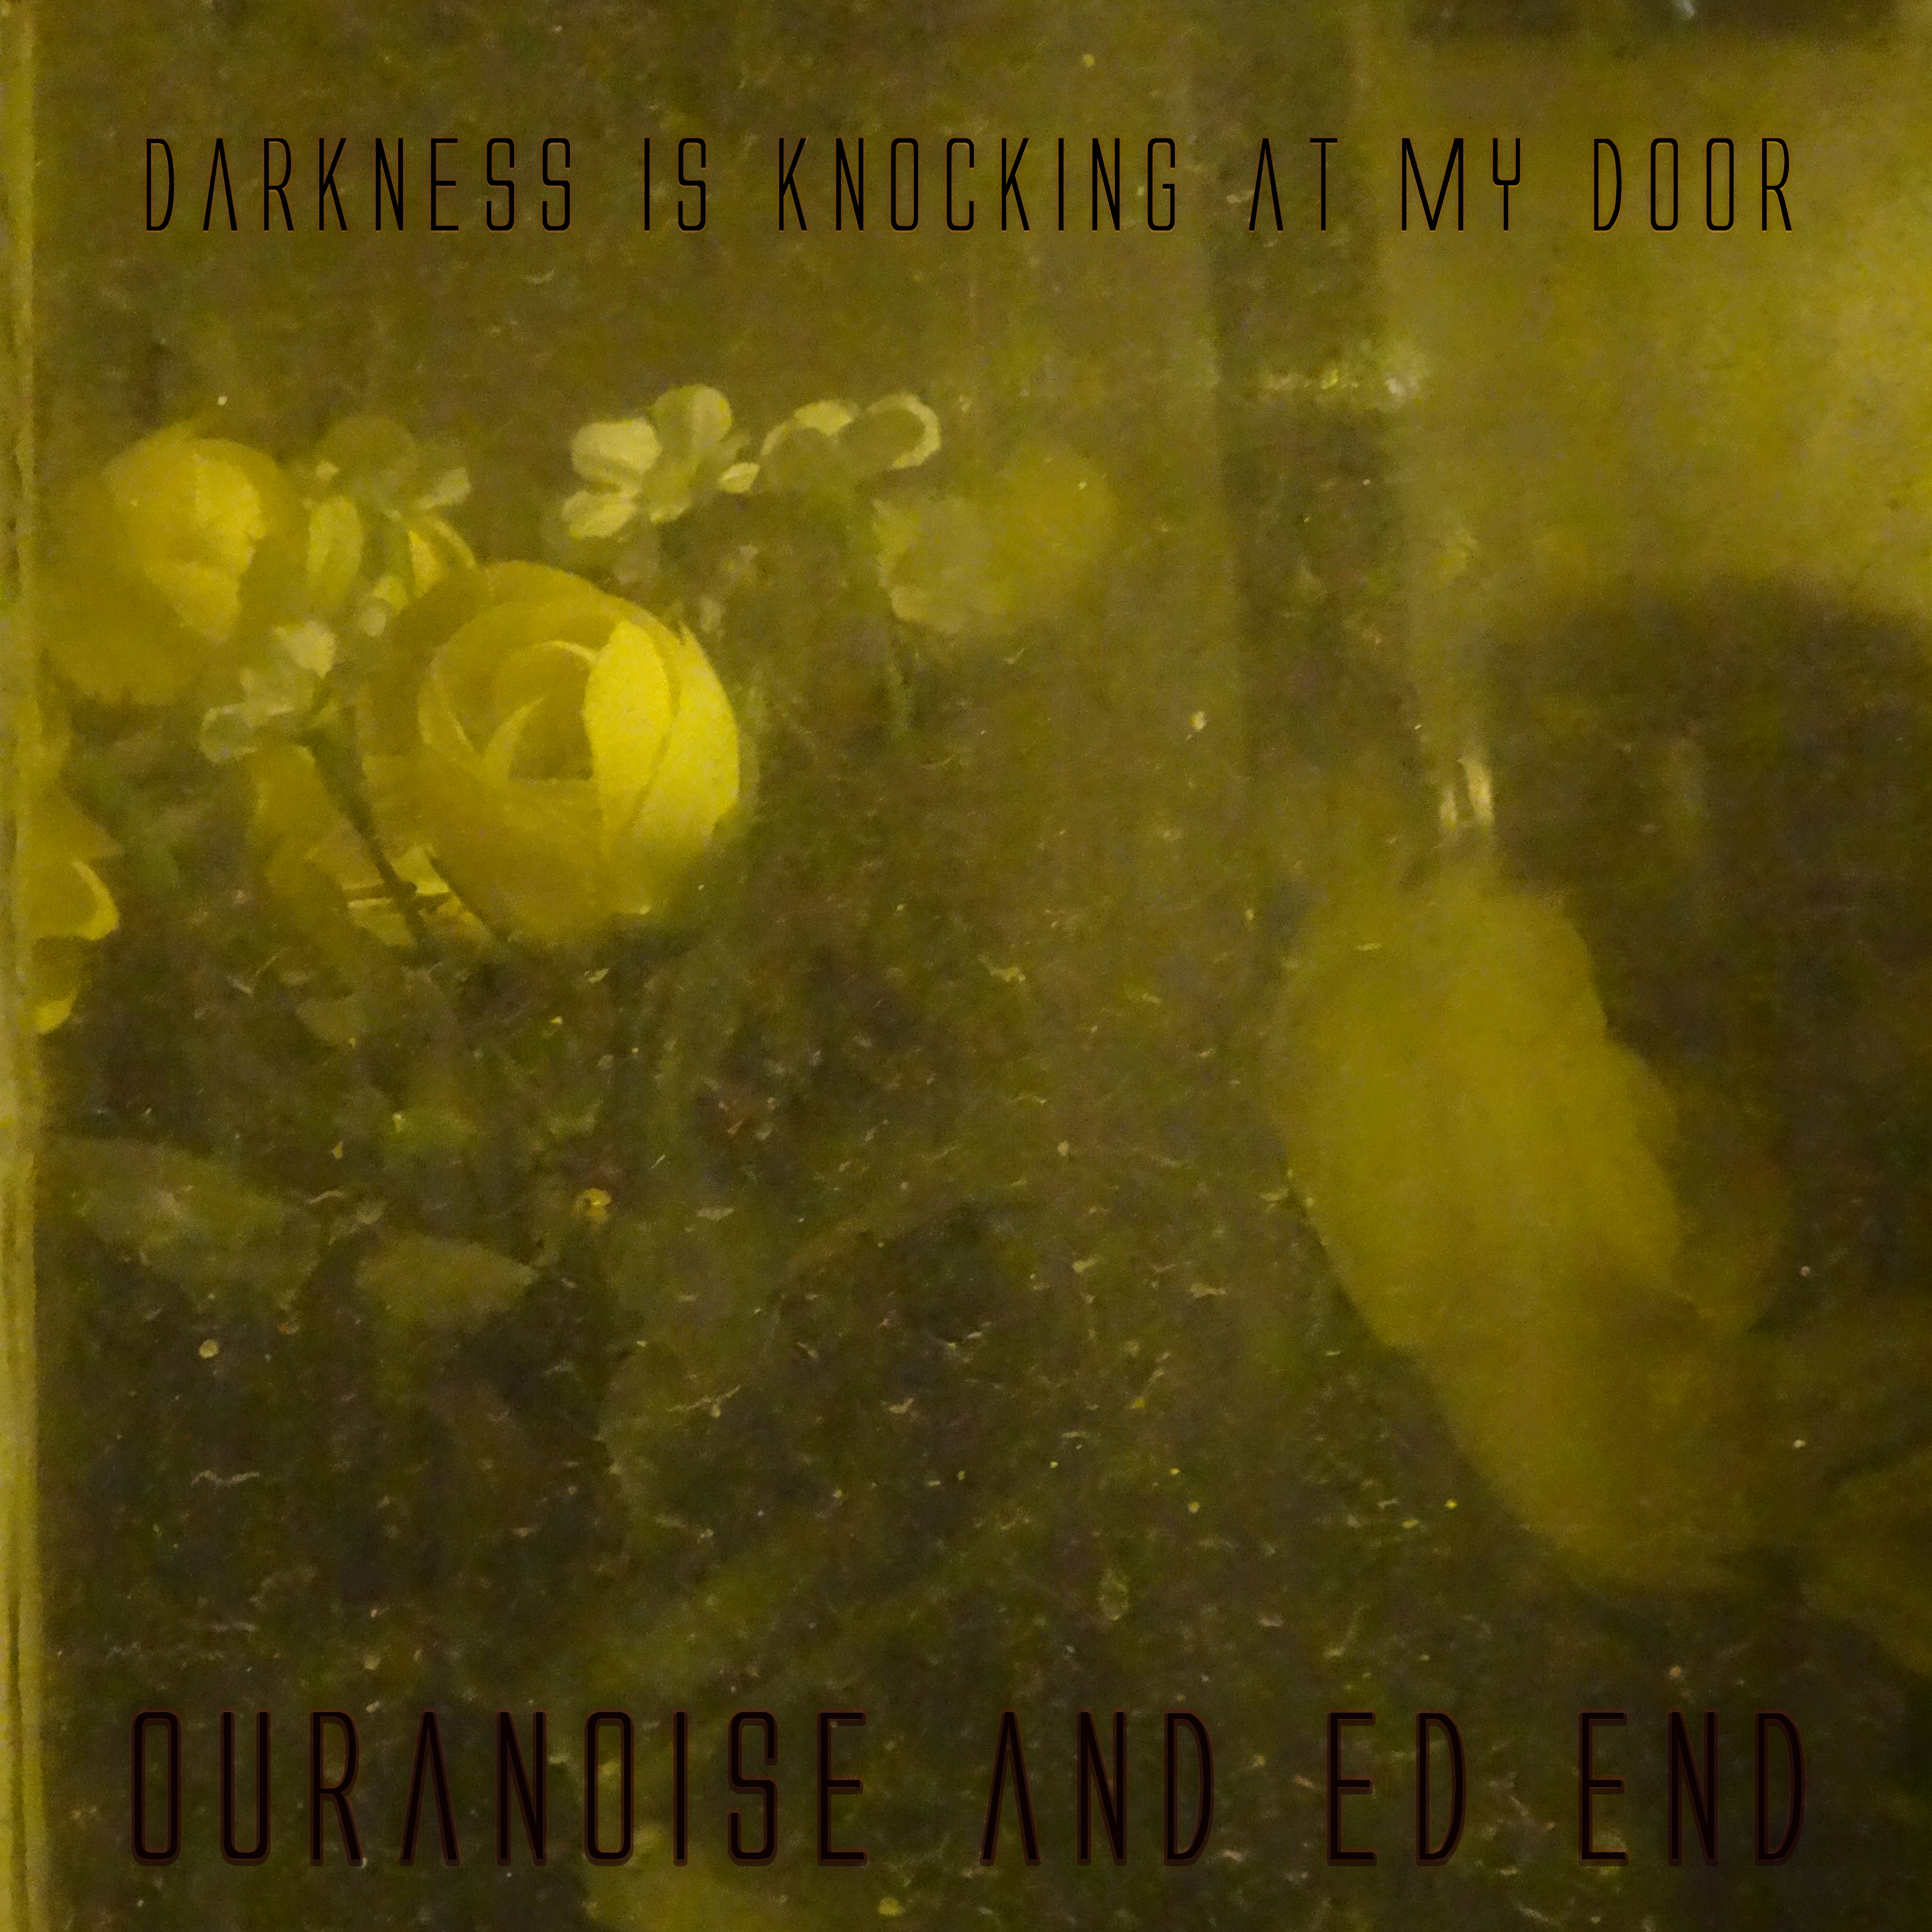 Ouranoise And Ed End – Darkness Is Knocking At My Door